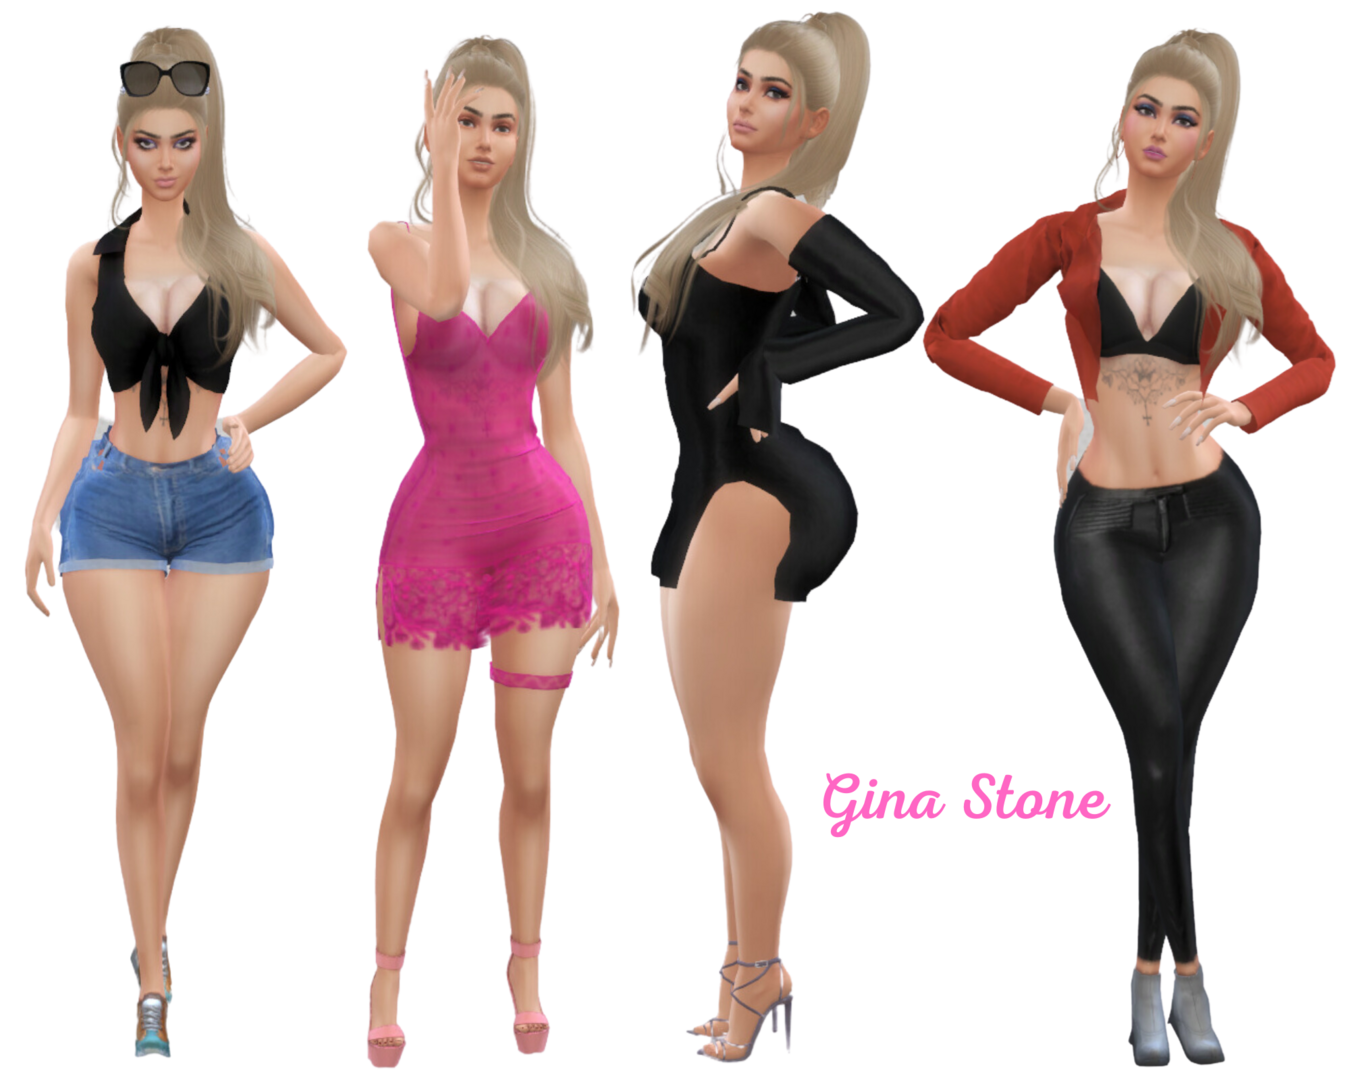 GinaStoneCollage1.thumb.png.ee44bfff34332e7d8137244d0d8fd4b1.png